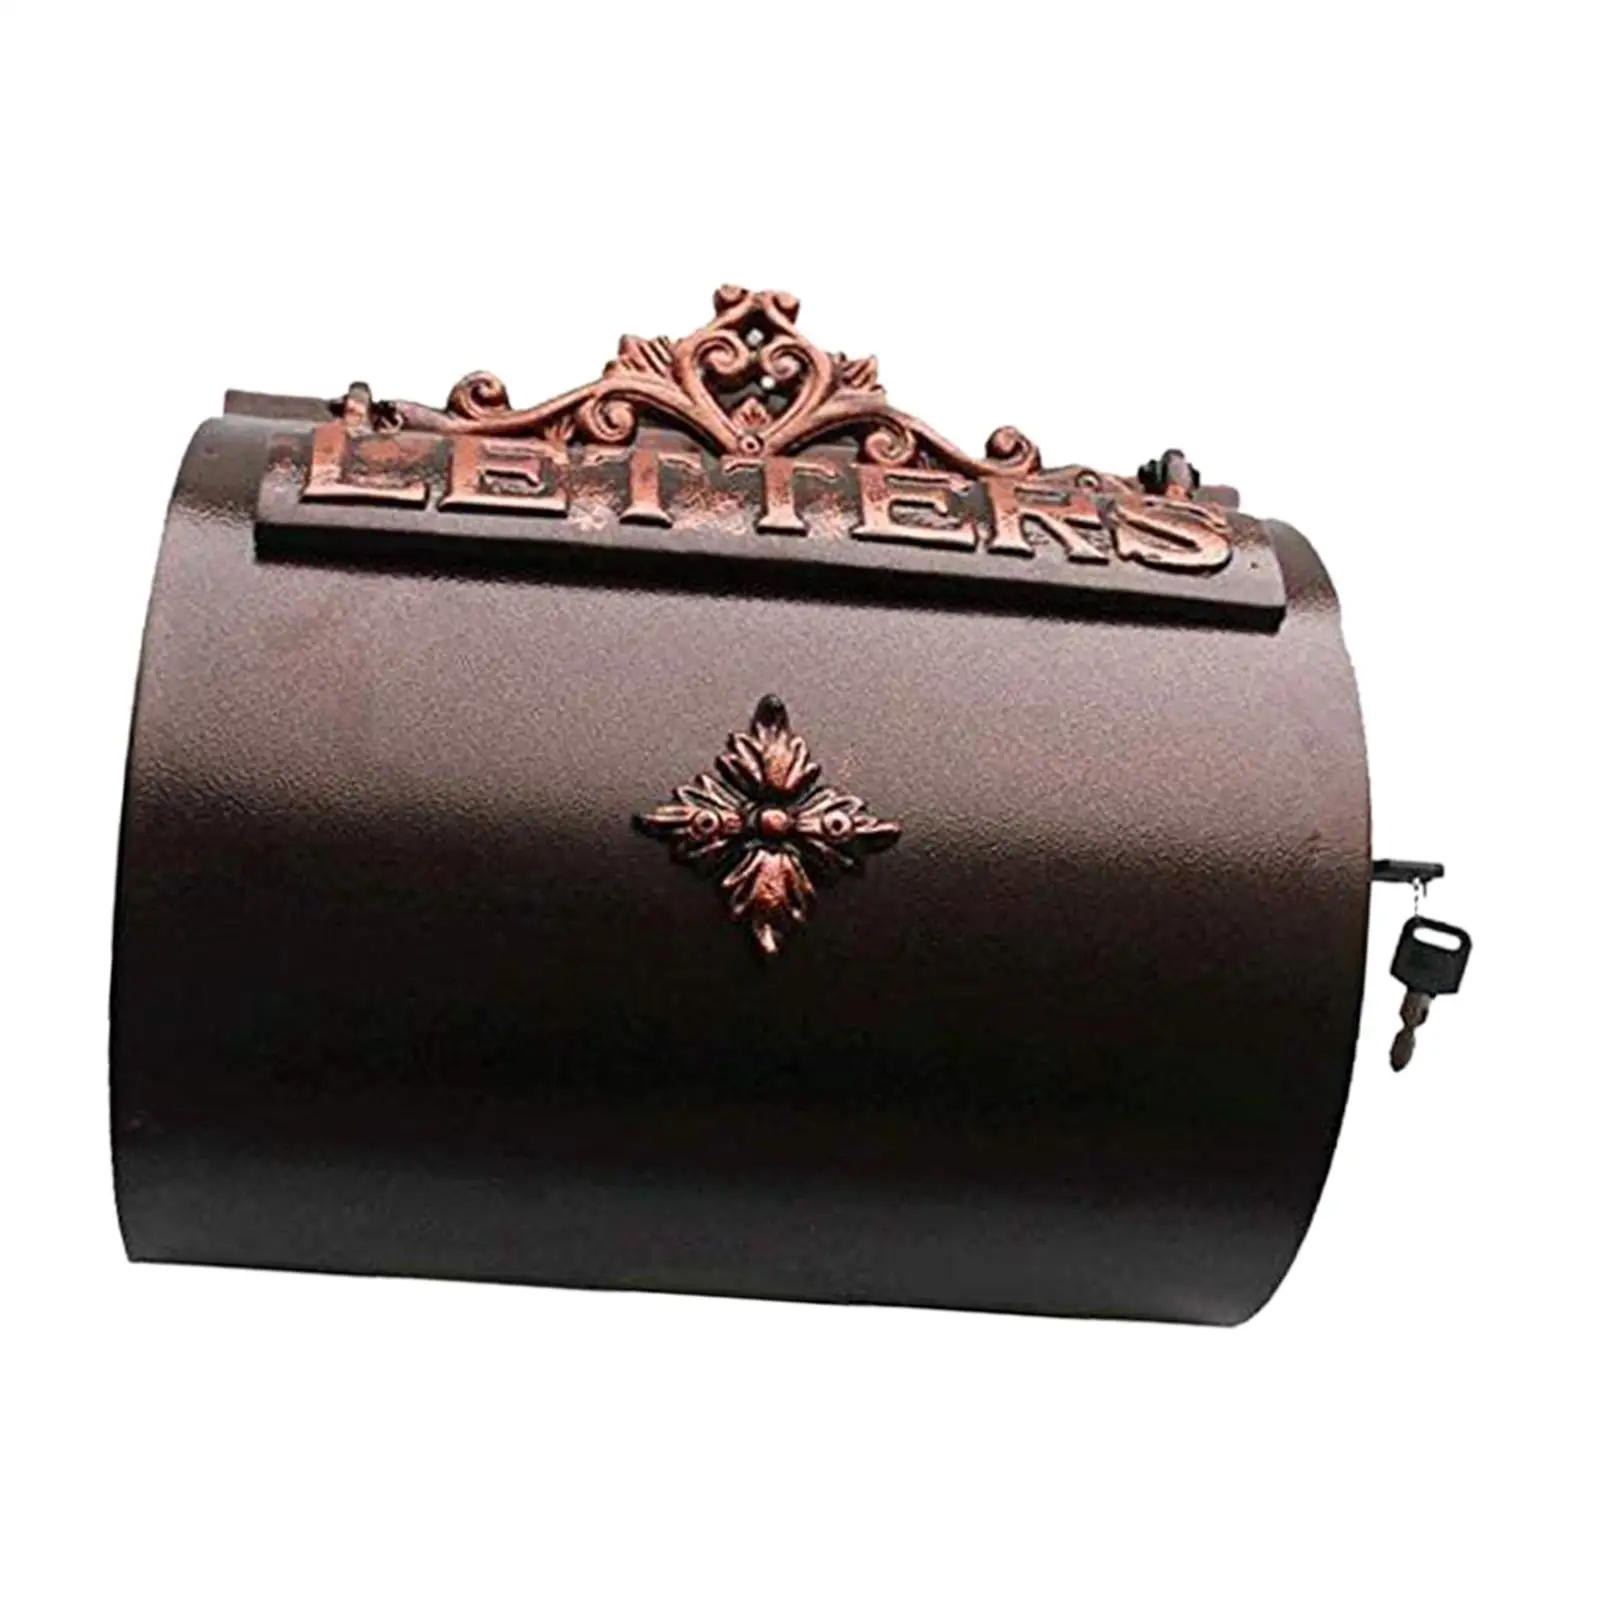 Pastoral Retro Letter Box with Key Lock Villa Outdoor Letter Box Retro Residential Mail Box Wall Mounted Mailbox